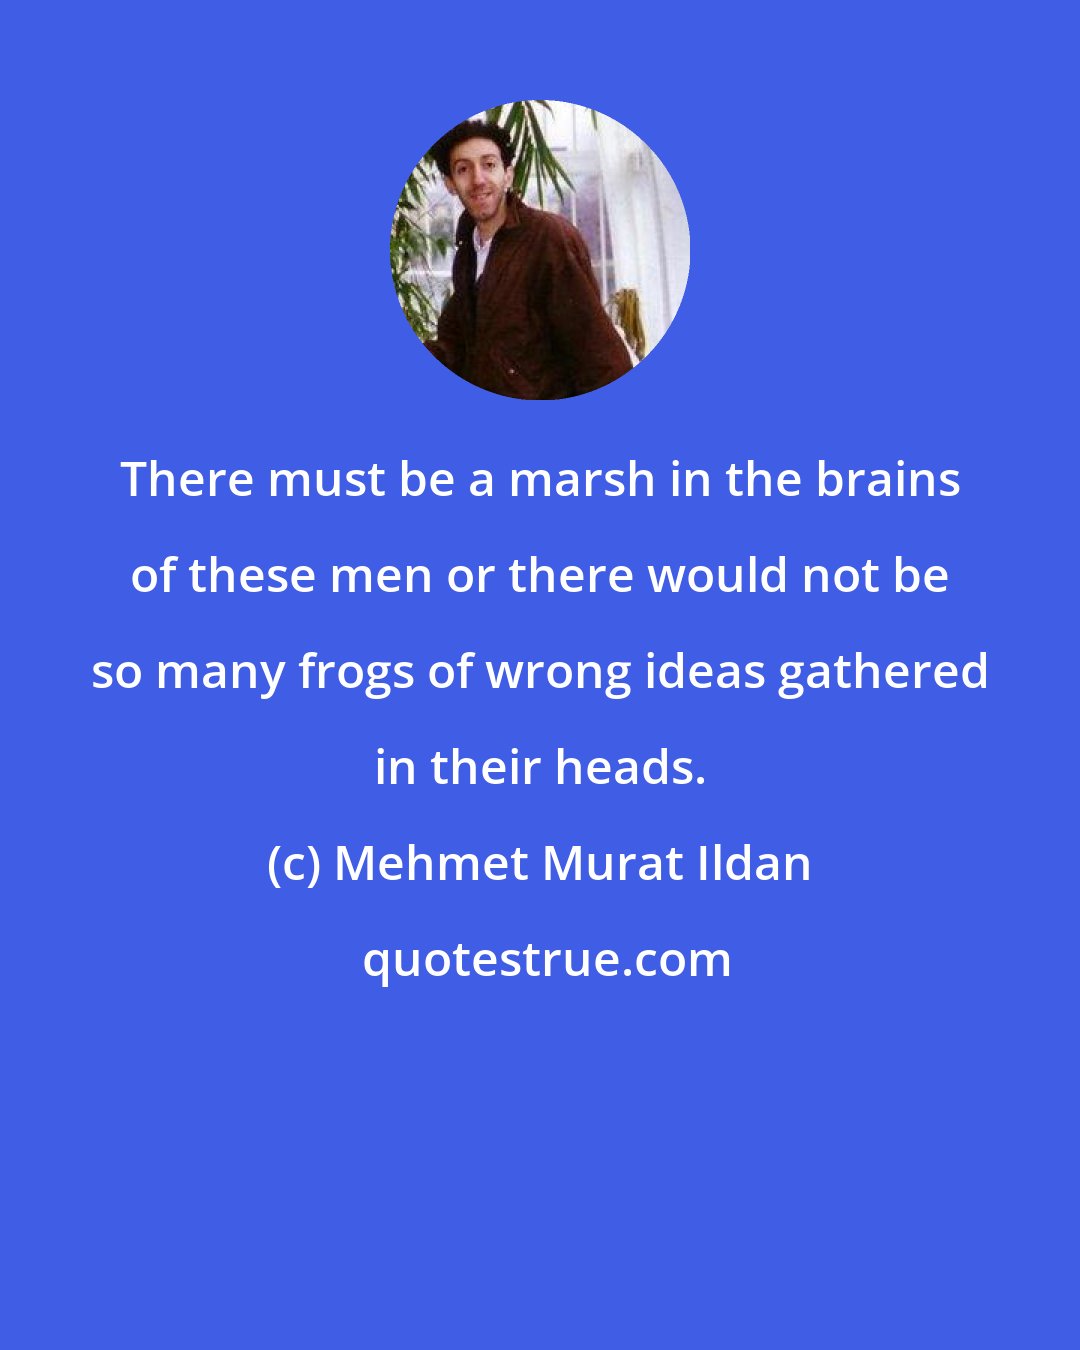 Mehmet Murat Ildan: There must be a marsh in the brains of these men or there would not be so many frogs of wrong ideas gathered in their heads.